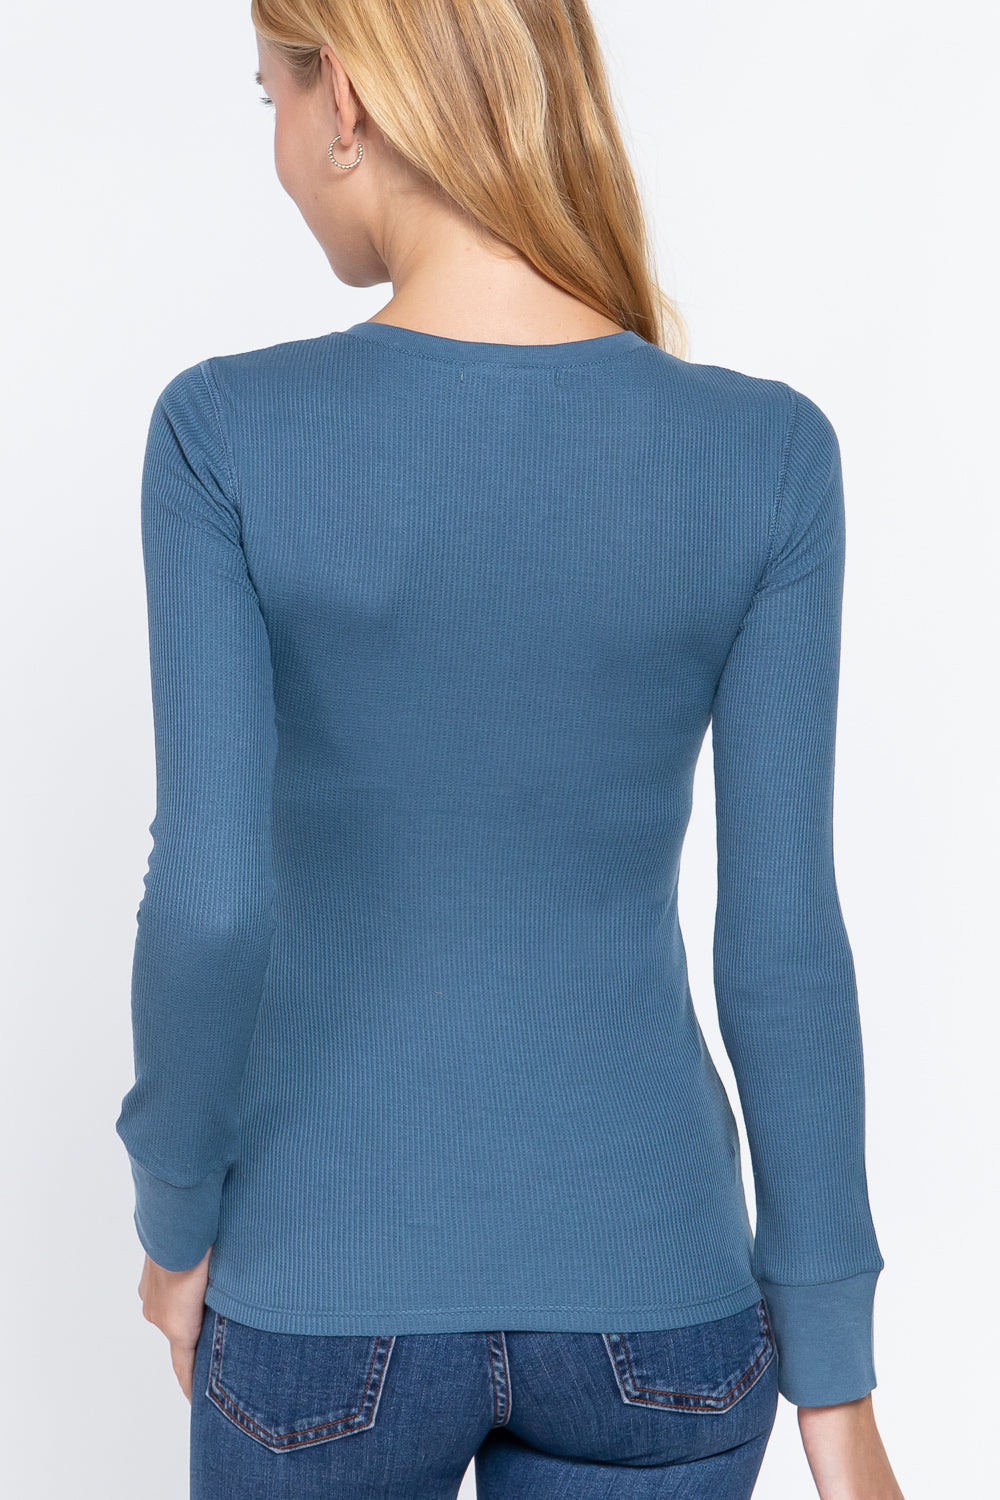 Steel blue Long Sleeve Waffle Knit Stretch Cotton Henley Thermal Top Shirt Shirts & Tops jehouze 